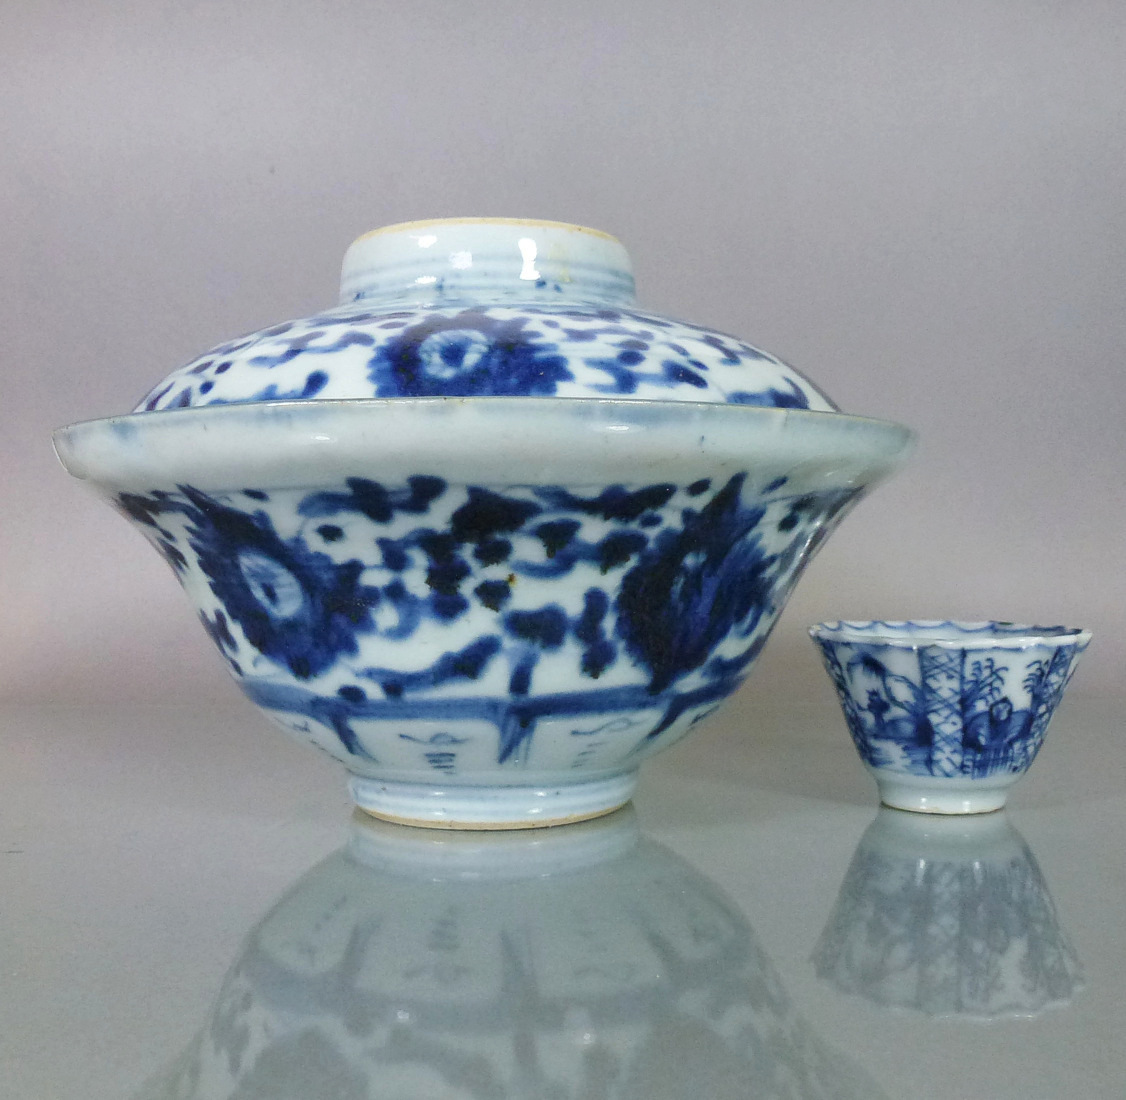 Chinese 18th/19th C. Ogee Bowl & Cover – Chrysanthemum